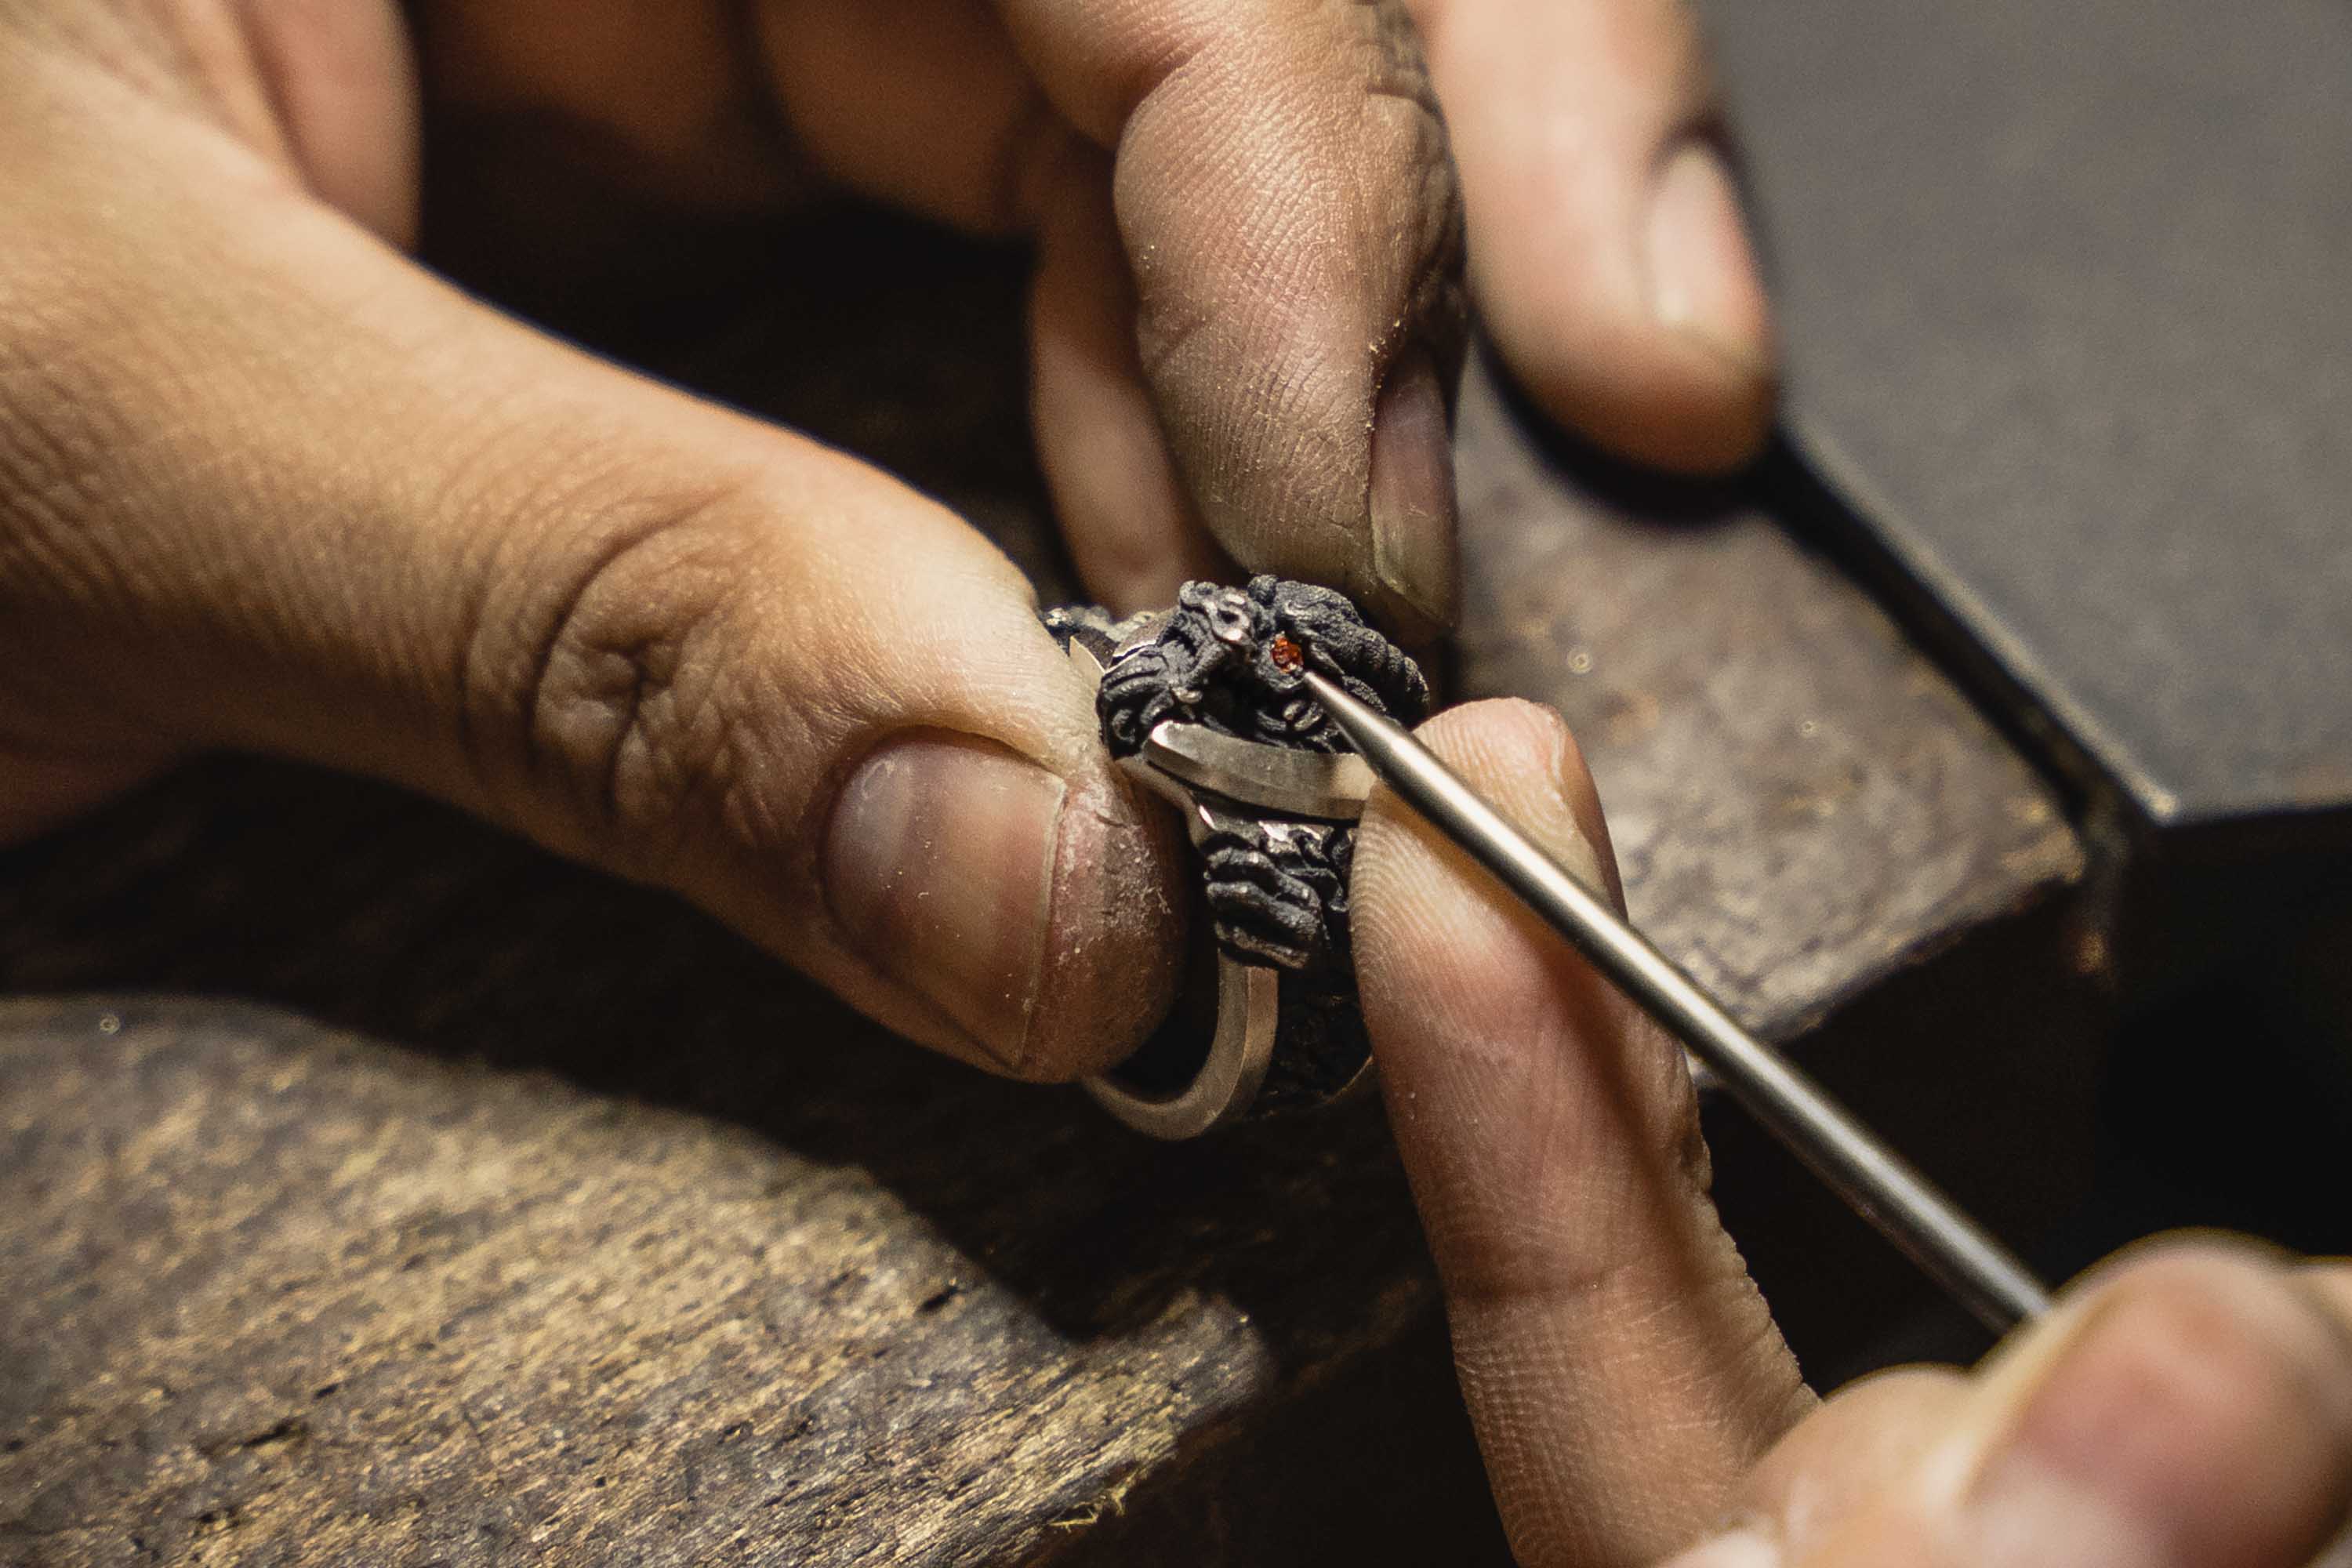 A Master Jeweler sets a gemstone in a Bushido Band from NightRider Jewelry